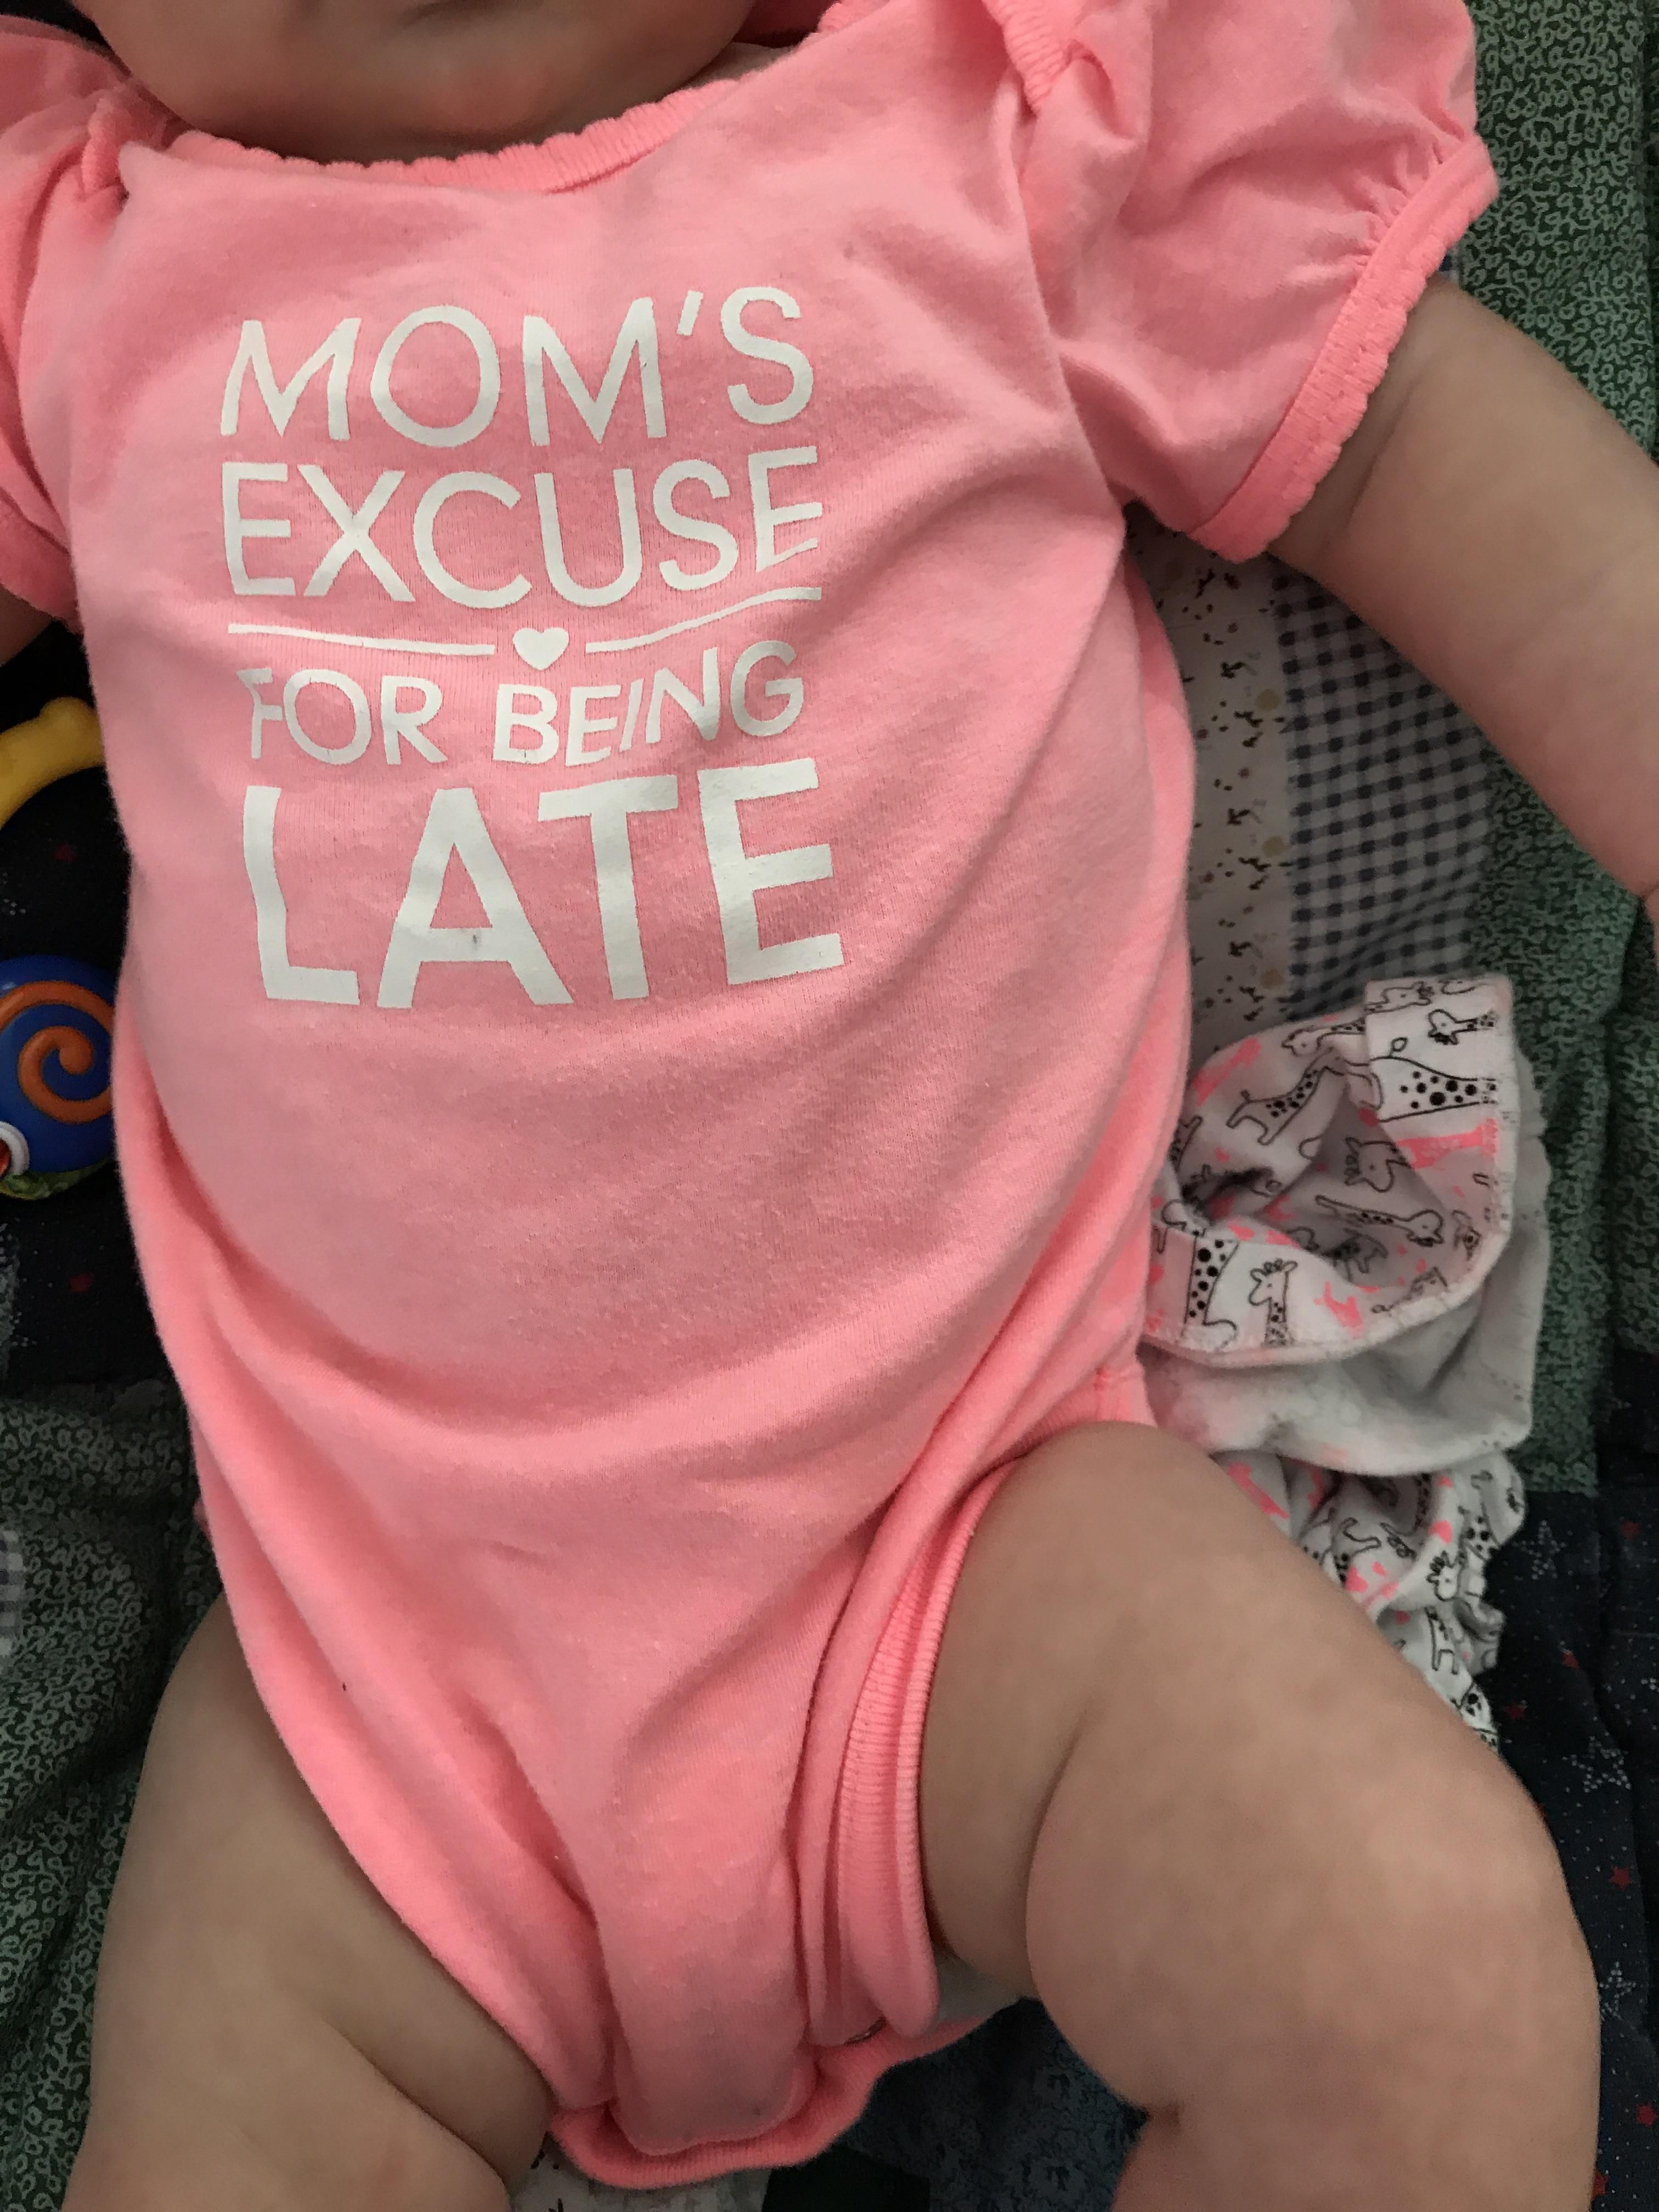 Just noticed my daughters shirt has a double meaning.